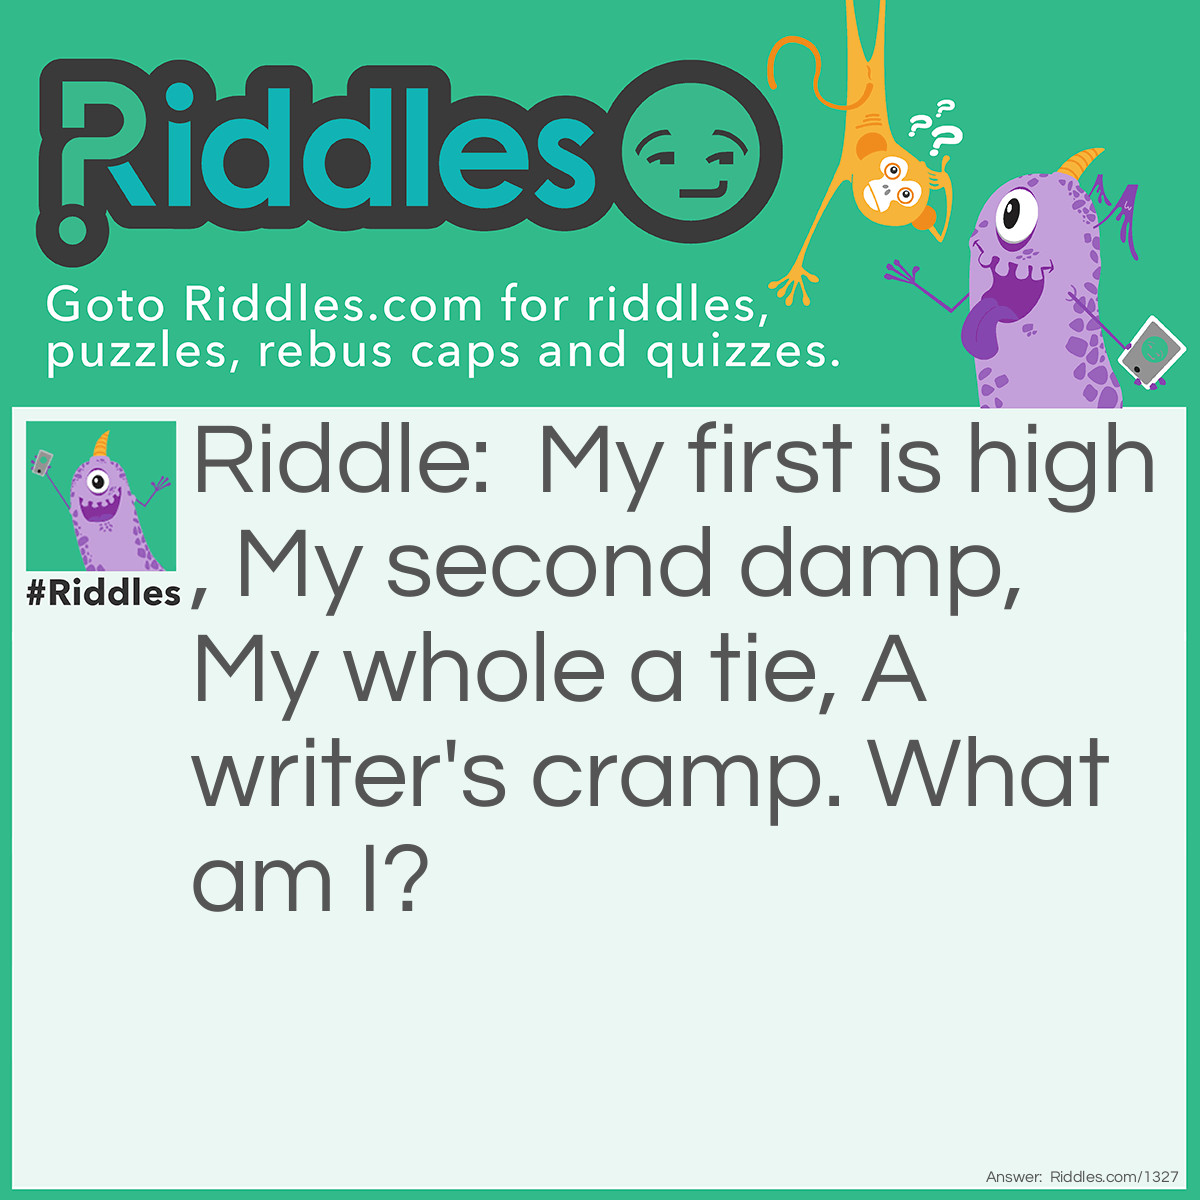 Riddle: My first is high, My second damp, My whole a tie, A writer's cramp. What am I? Answer: Hyphen. The first two lines yield high-fen. A hyphen is used by a writer to tie (or cramp) two words together.